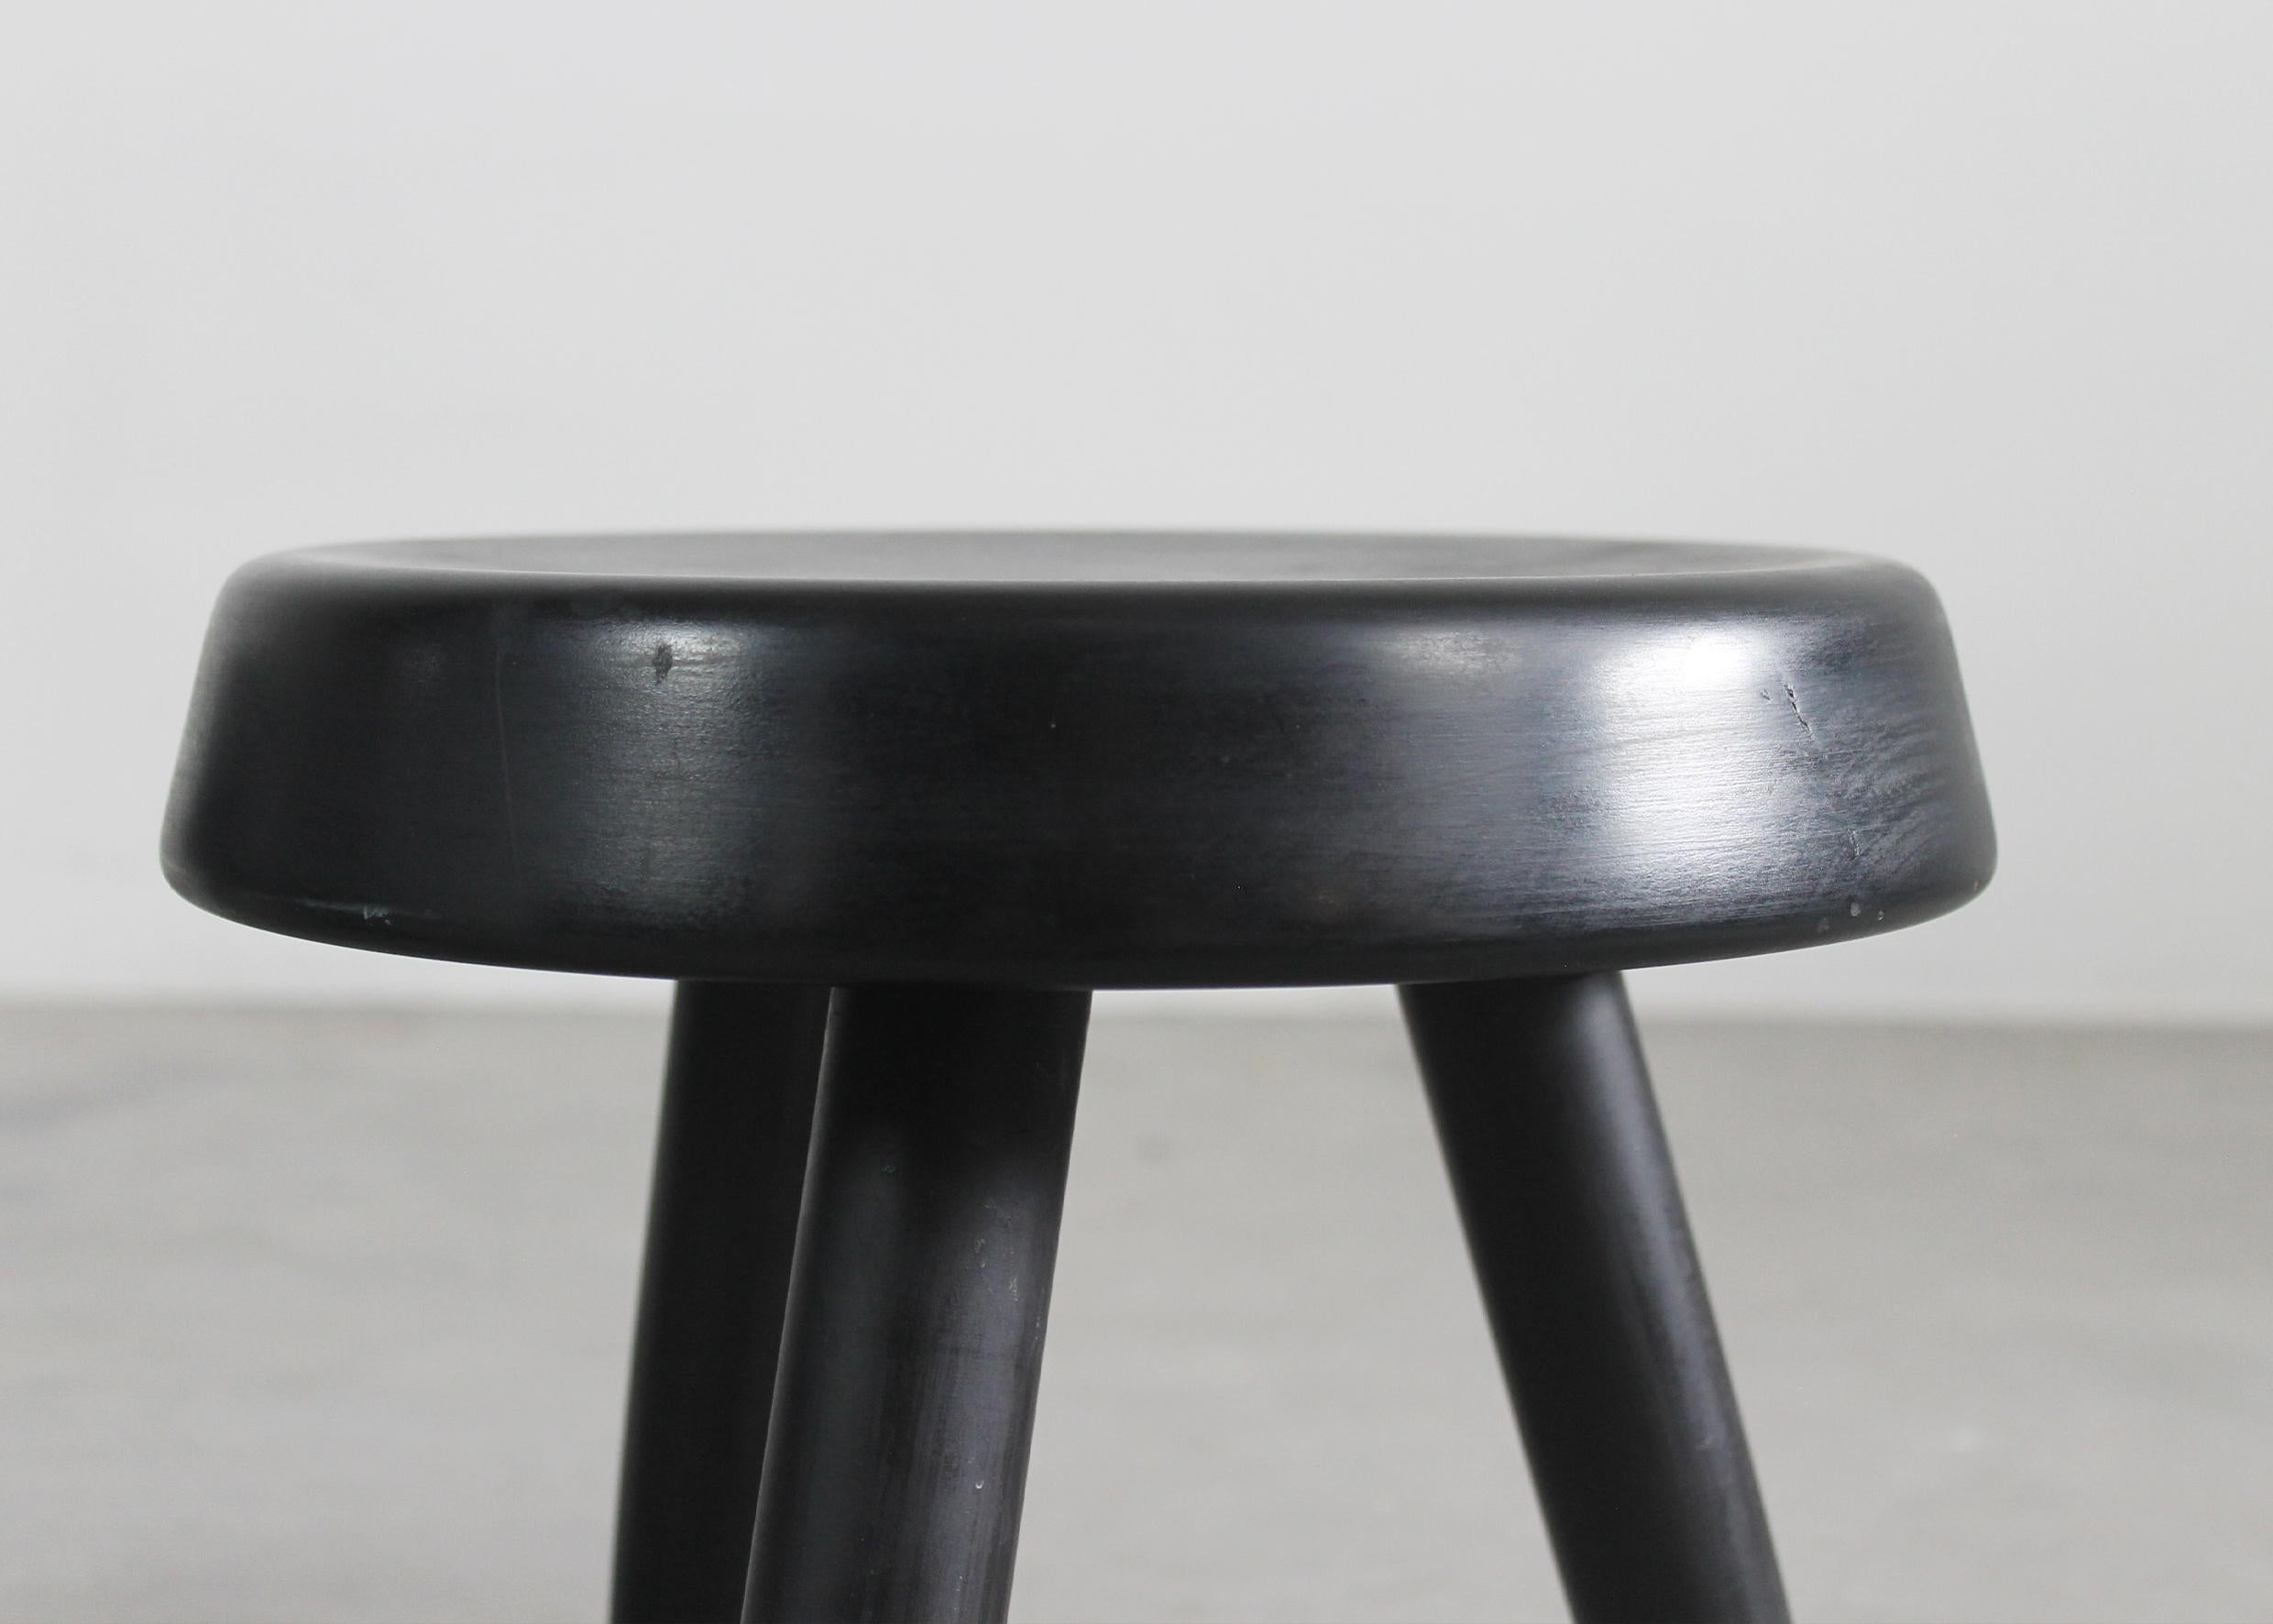 European Charlotte Perriand Set of Two Black Stools in Wood 1950s